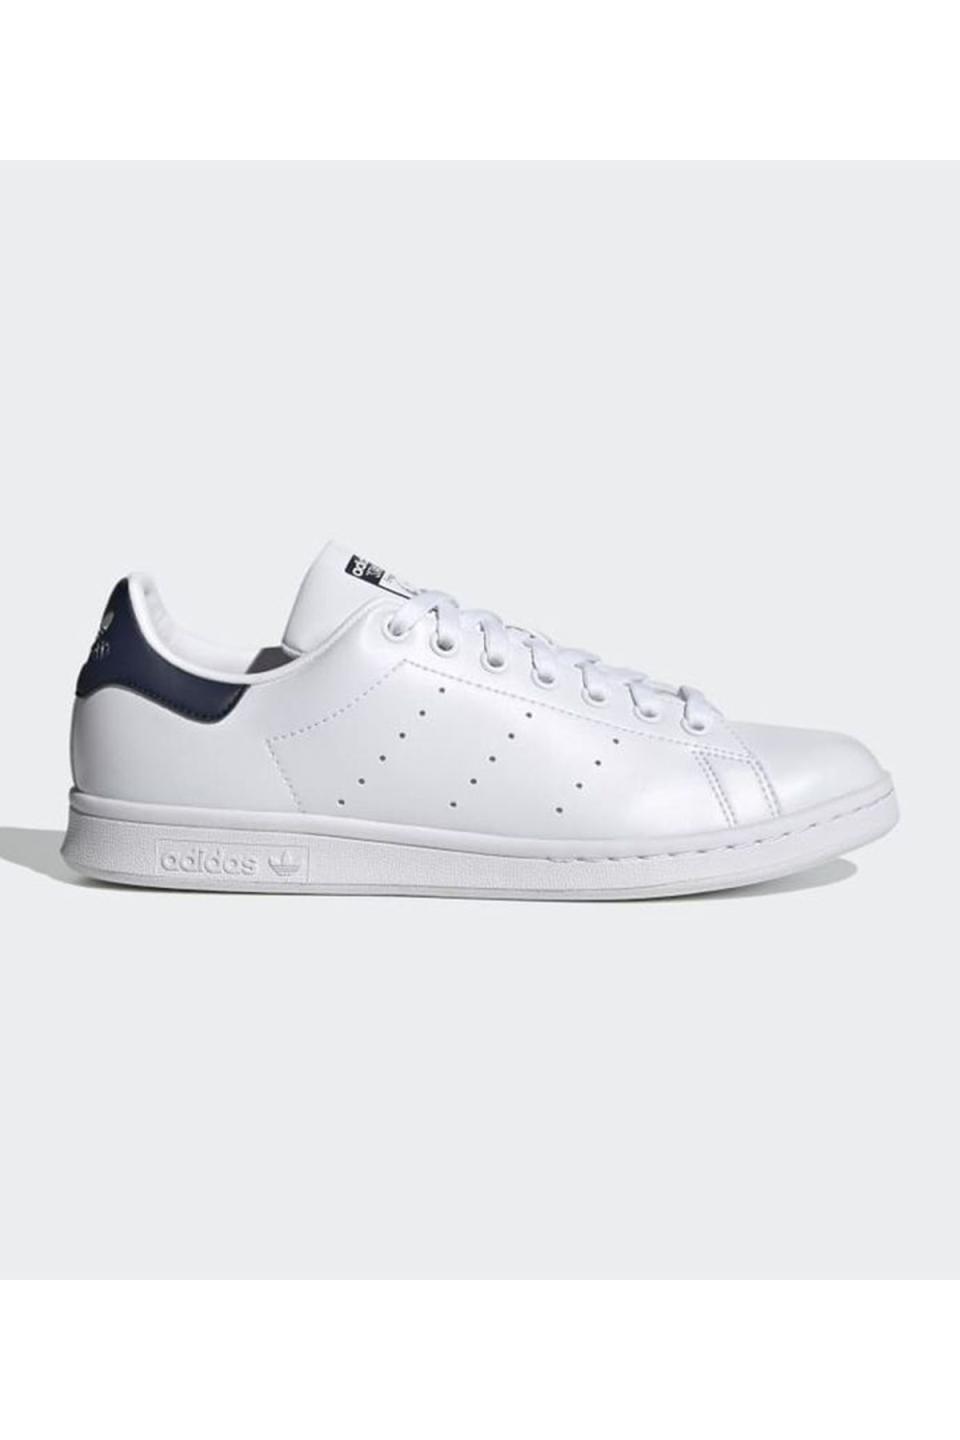 5) Stan Smith Shoes